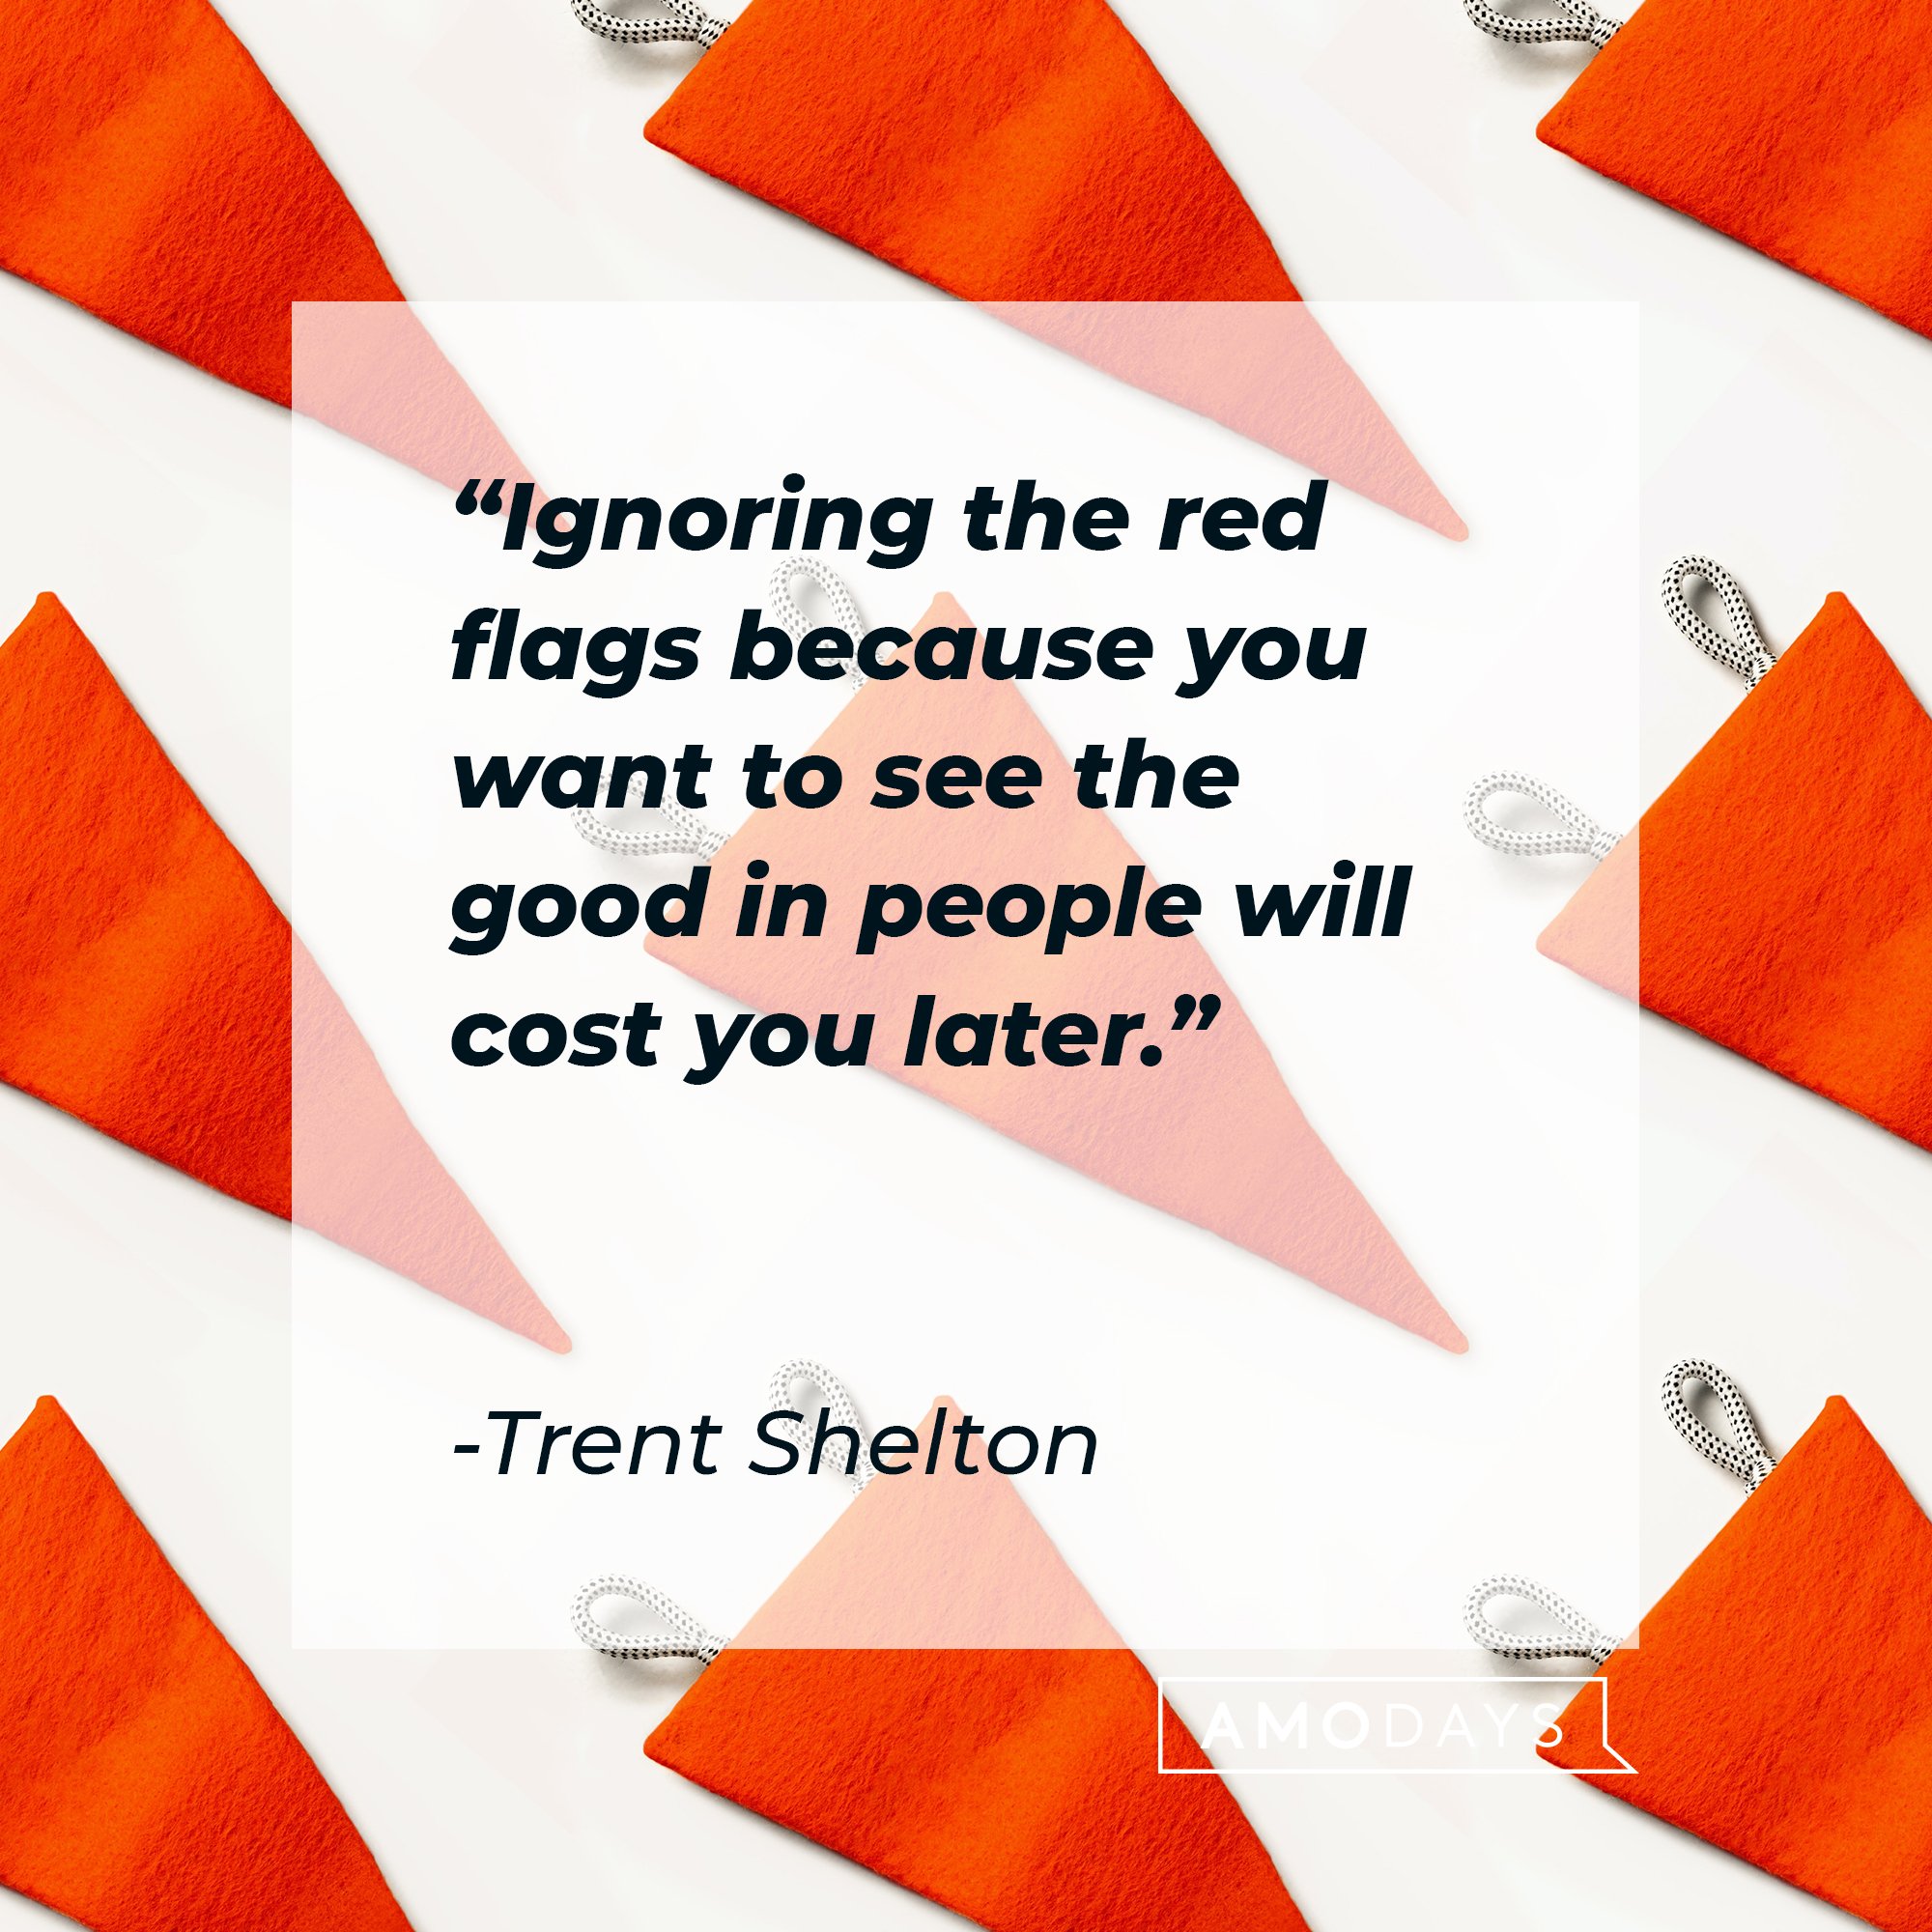 Trent Shelton's quote: “Ignoring the red flags because you want to see the good in people will cost you later." | Image: AmoDays